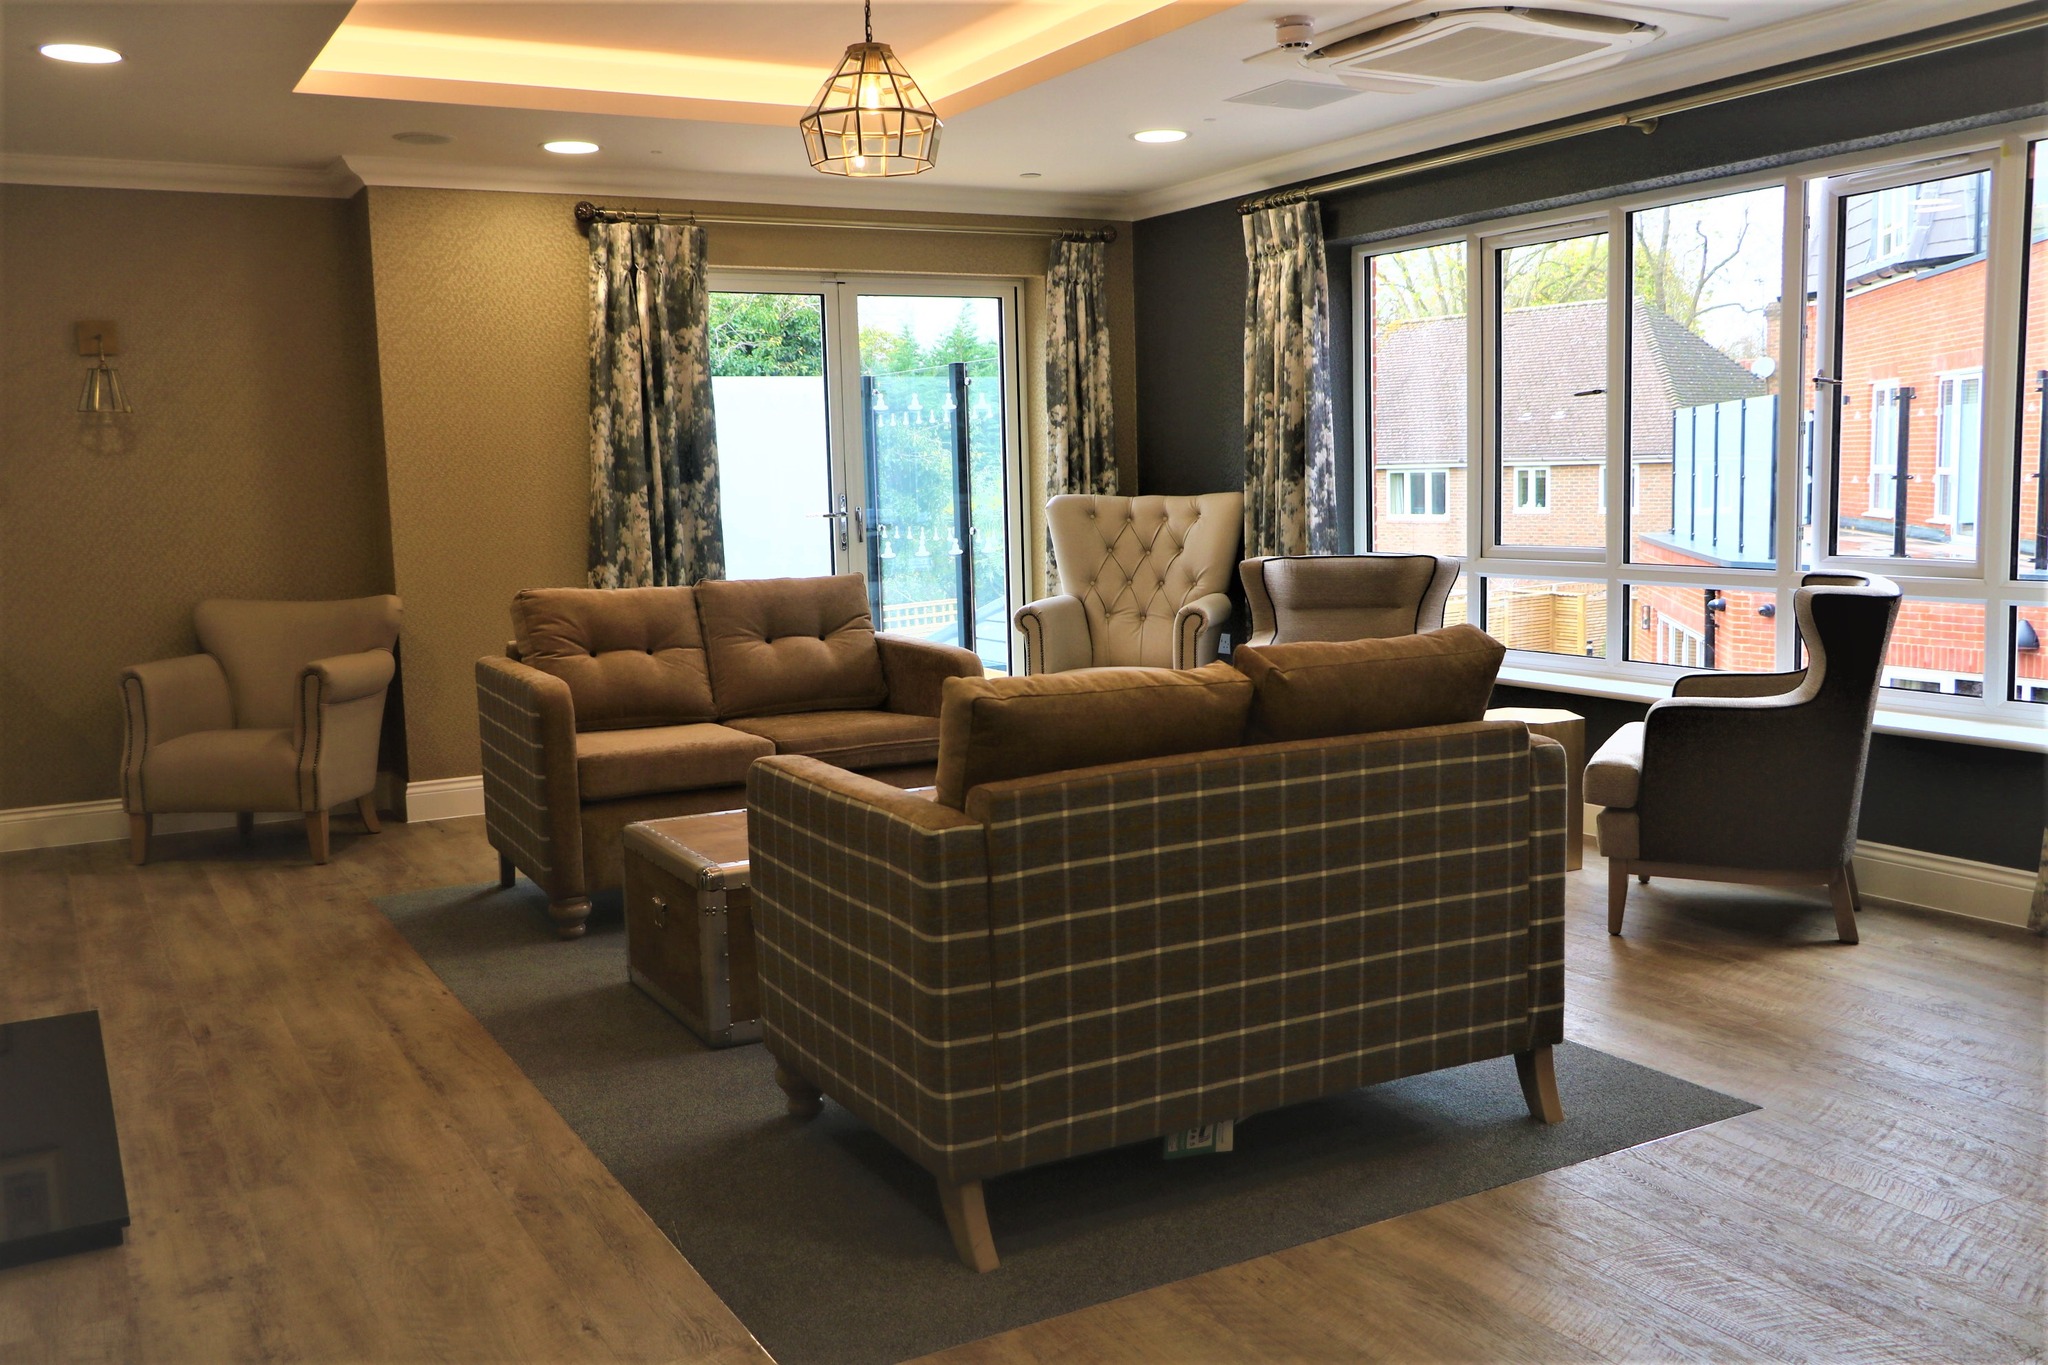 Kailash Manor Luxury Living Room Pinner Care Home